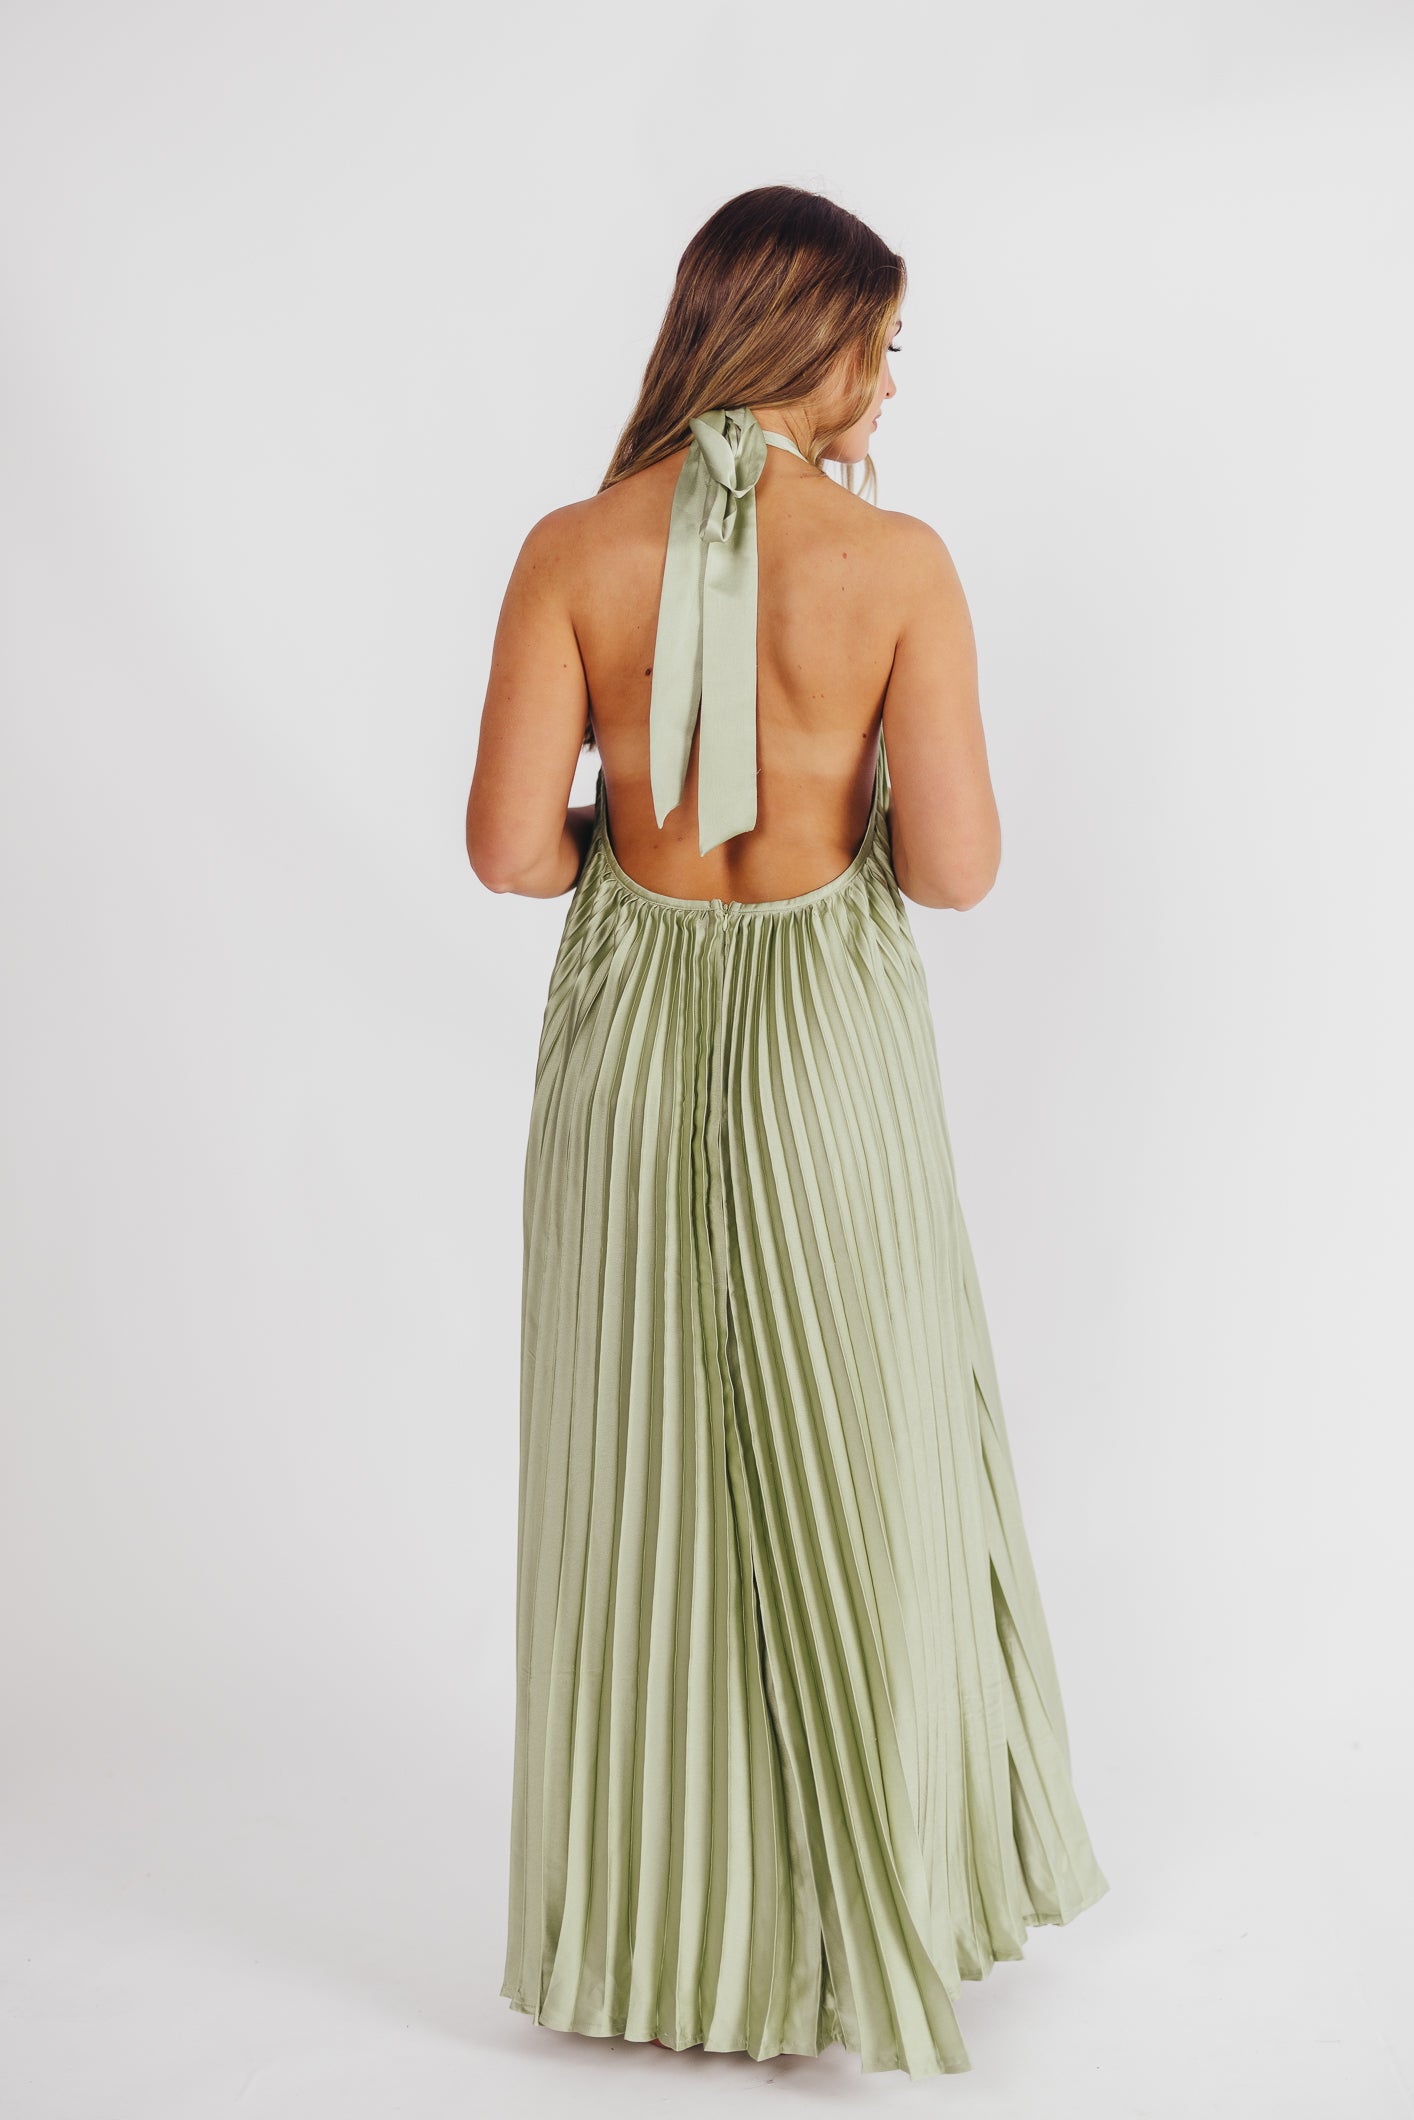 Maren Pleated Halter Maxi Dress in Sage - Bump Friendly (S-XL) Almost Sold Out!